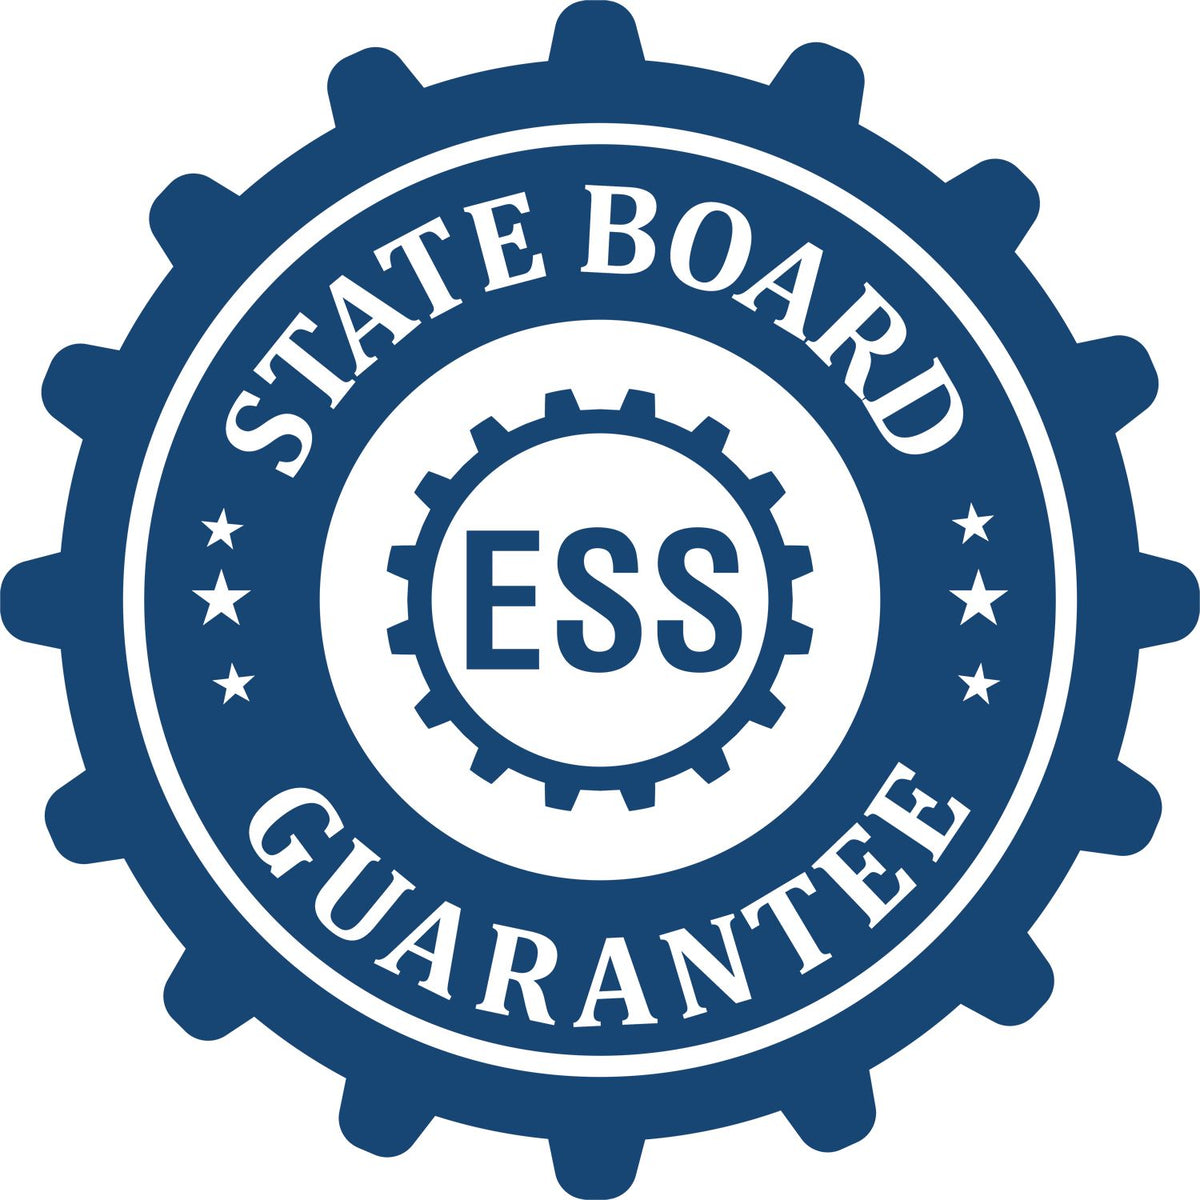 An emblem in a gear shape illustrating a state board guarantee for the Hybrid Alabama Engineer Seal